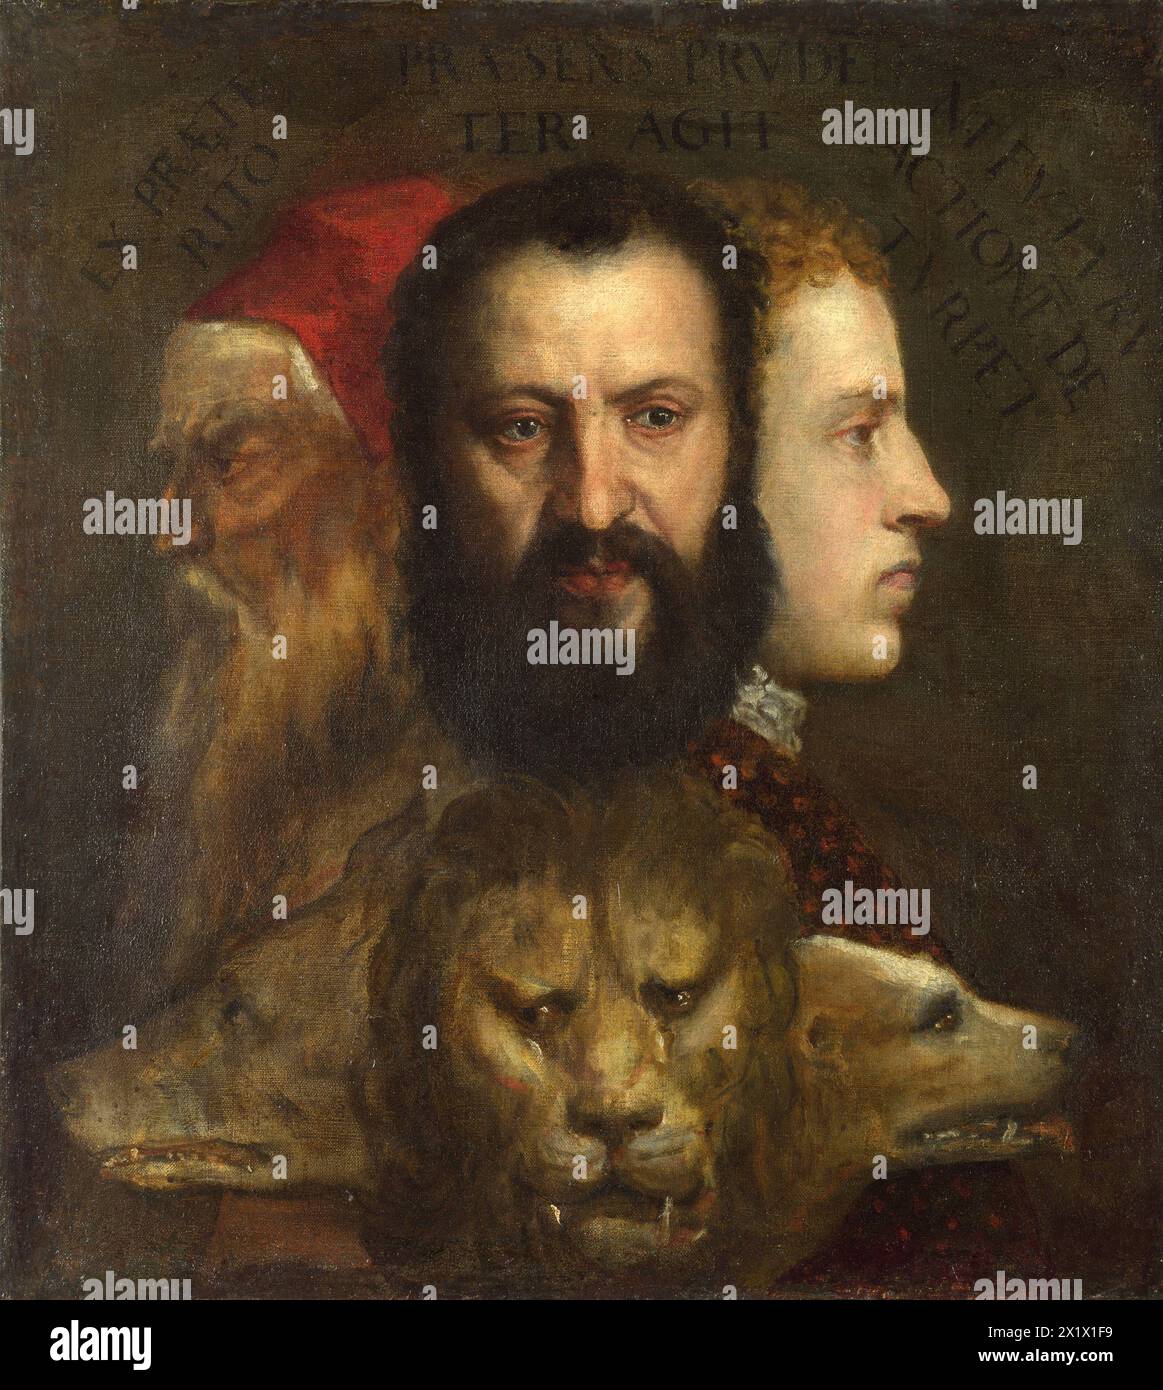 Titian, Allegory of Prudence (c.  1565–1570): The three human heads symbolise past, present and future, the characterisation of which is furthered by the triple-headed beast (wolf, lion, dog), girded by the body of a big snake. Stock Photo